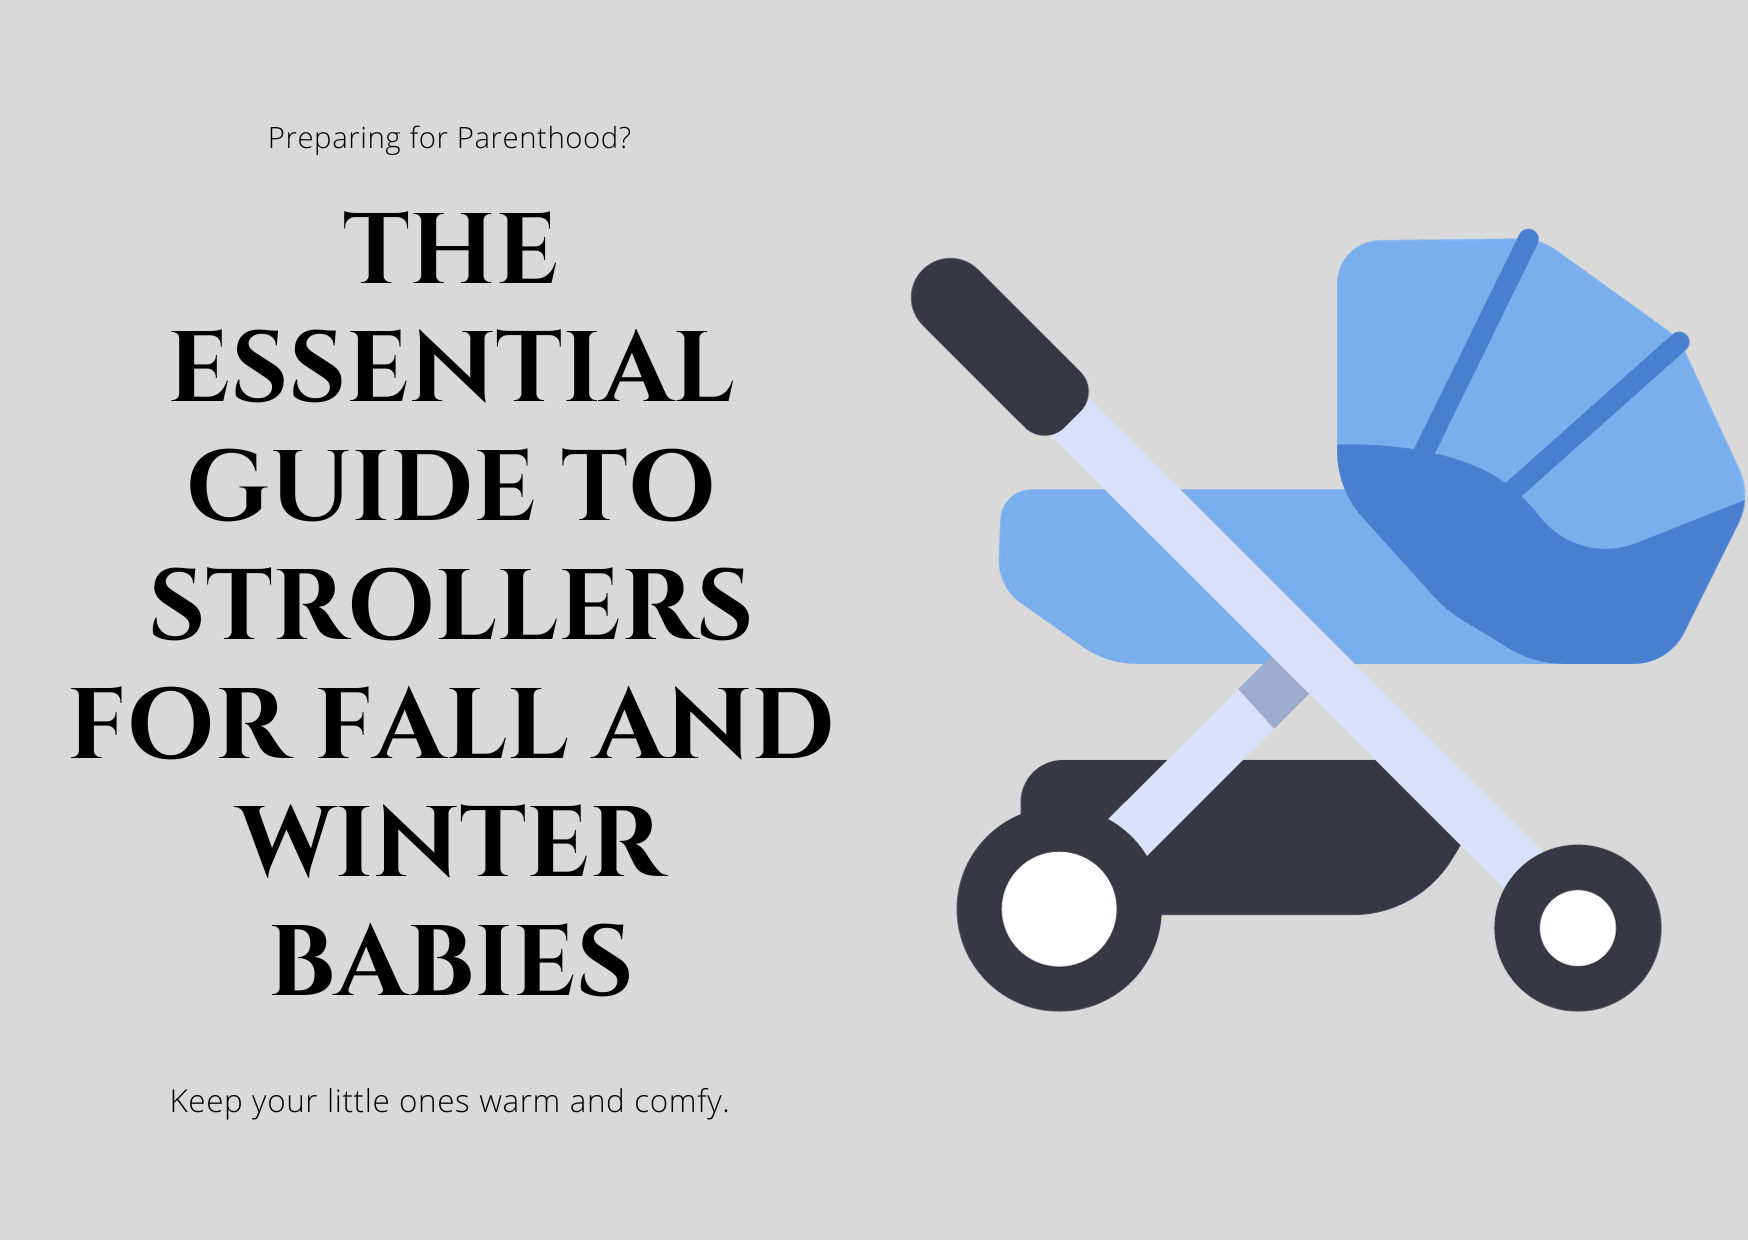 The Essential Guide to Choosing a Stroller for Fall and Winter Babies